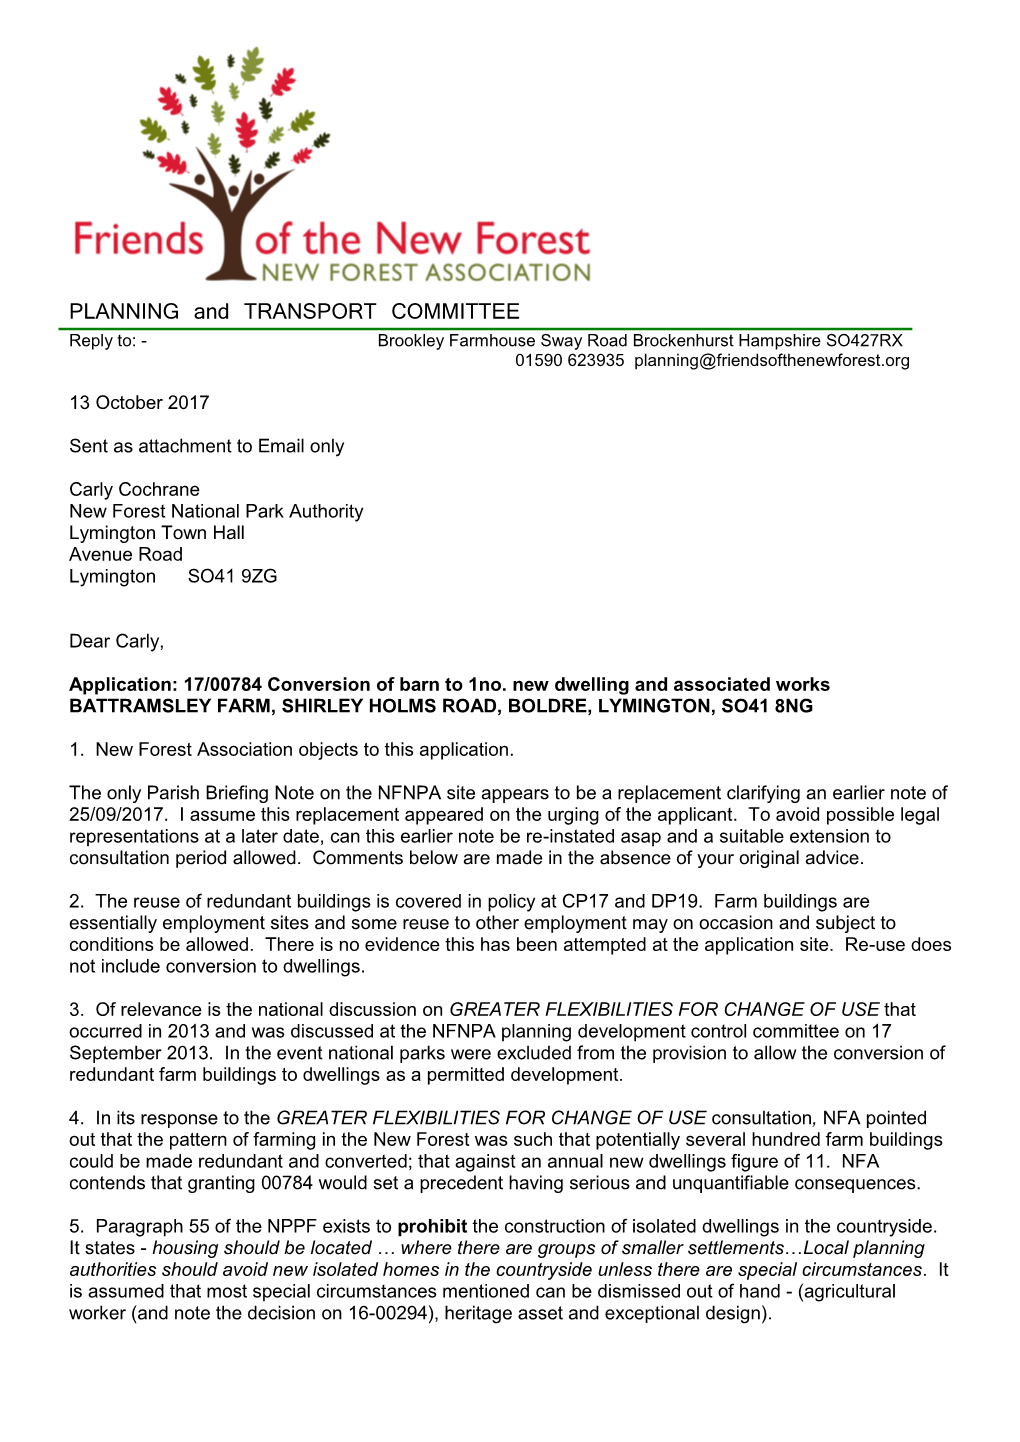 PLANNING and TRANSPORT COMMITTEE Reply To: - Brookley Farmhouse Sway Road Brockenhurst Hampshire SO427RX 01590 623935 Planning@Friendsofthenewforest.Org